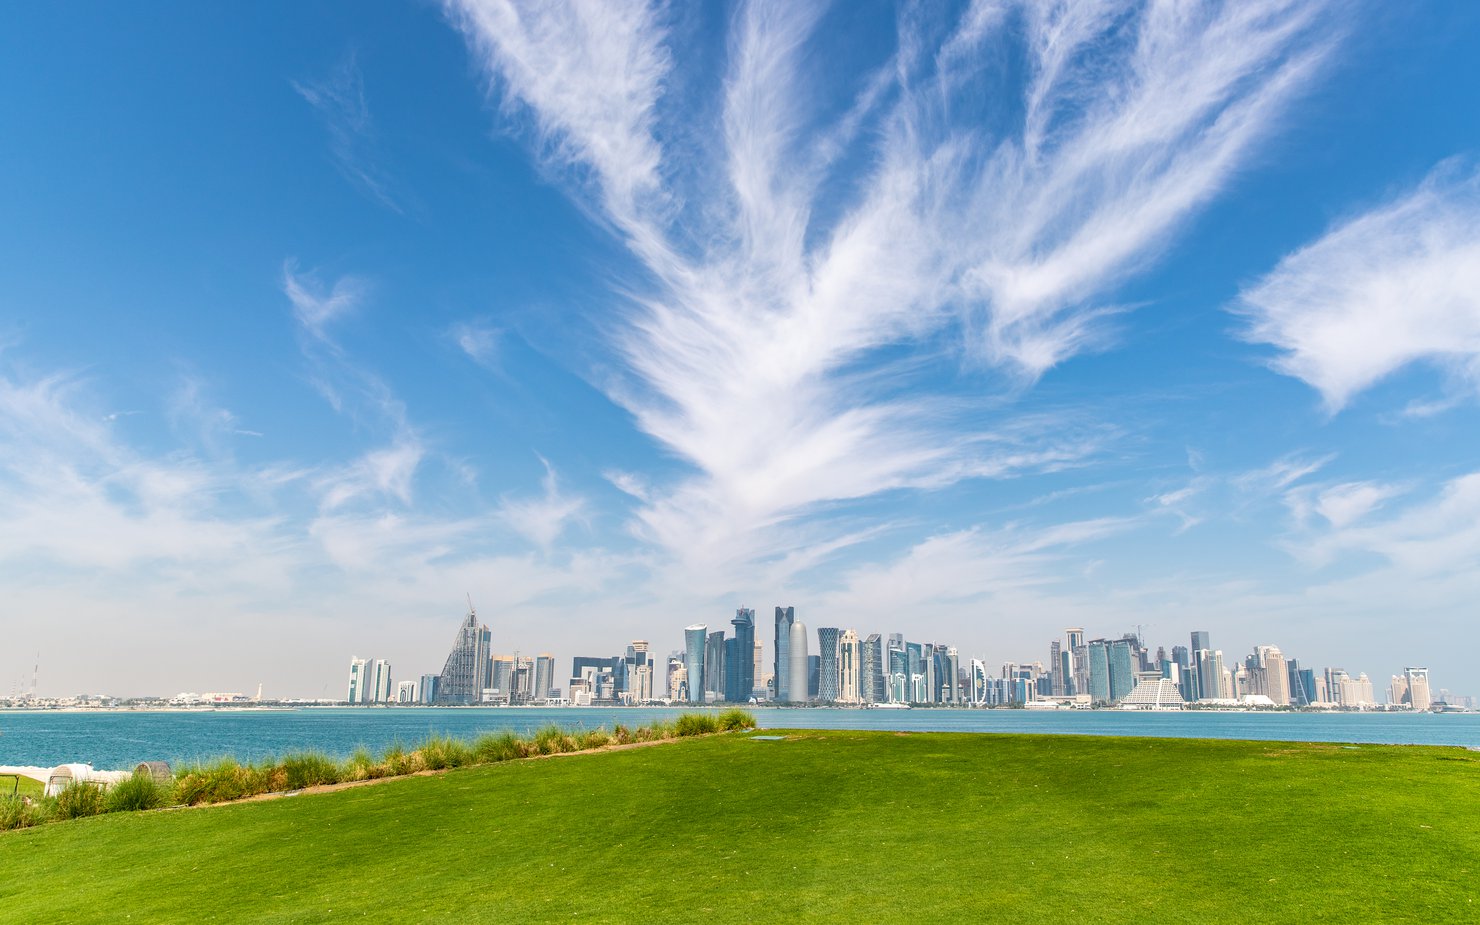 A panorama of Doha's skyline behind a large green grassy area